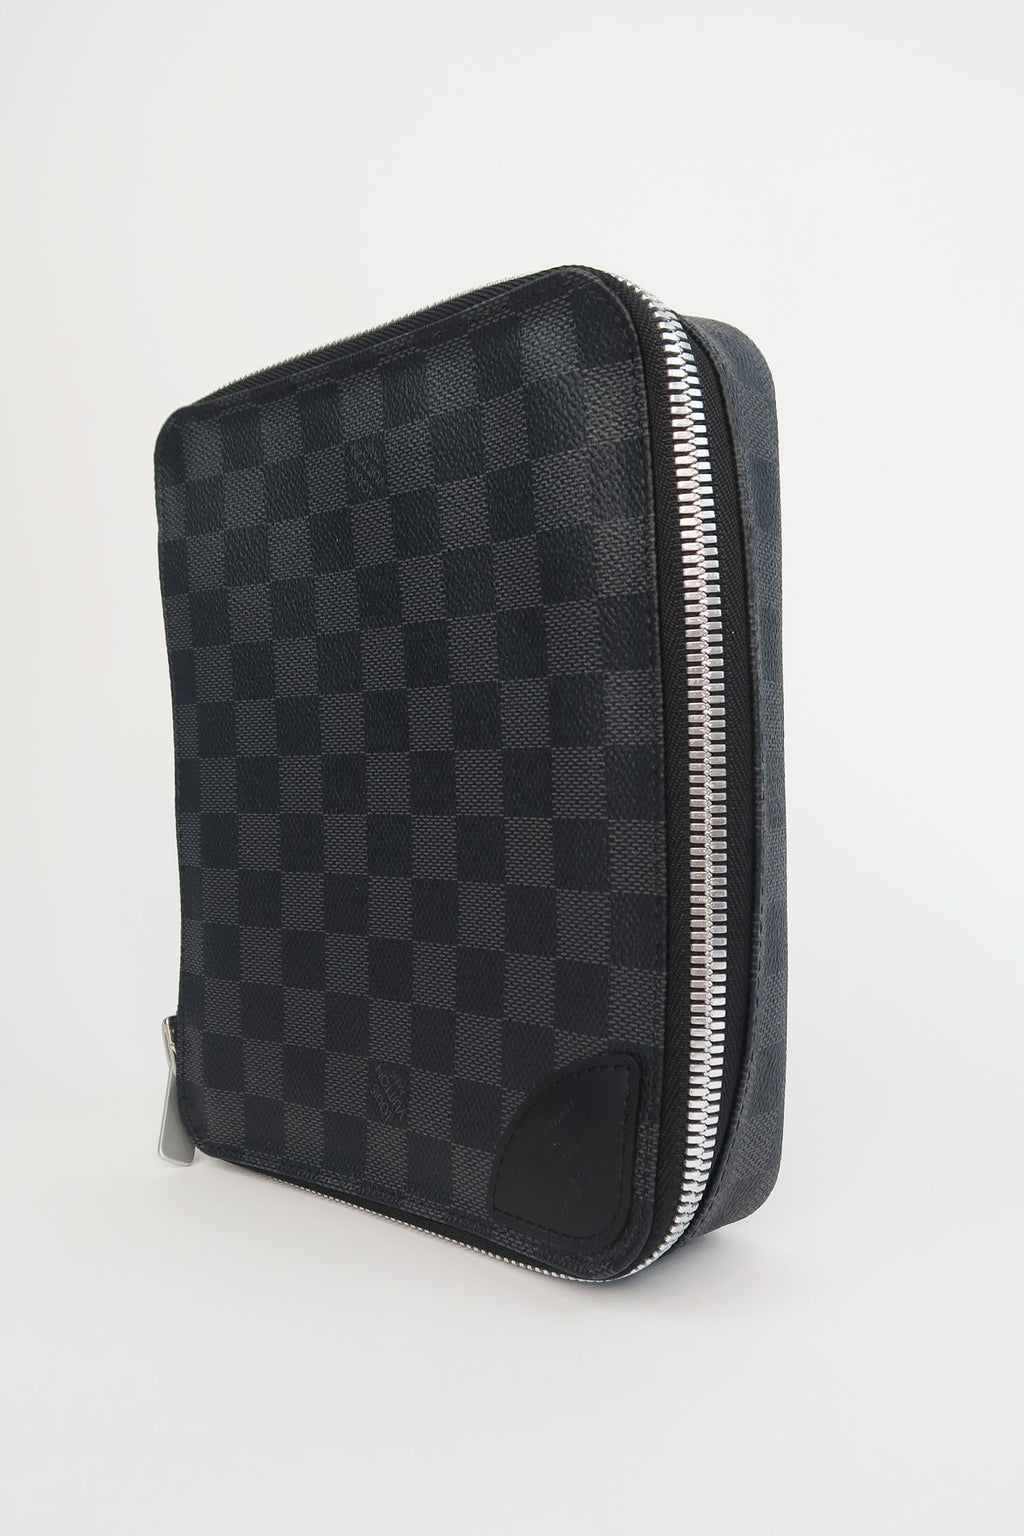 Louis Vuitton Damier Graphite Packing Cube PM – The Find Studio